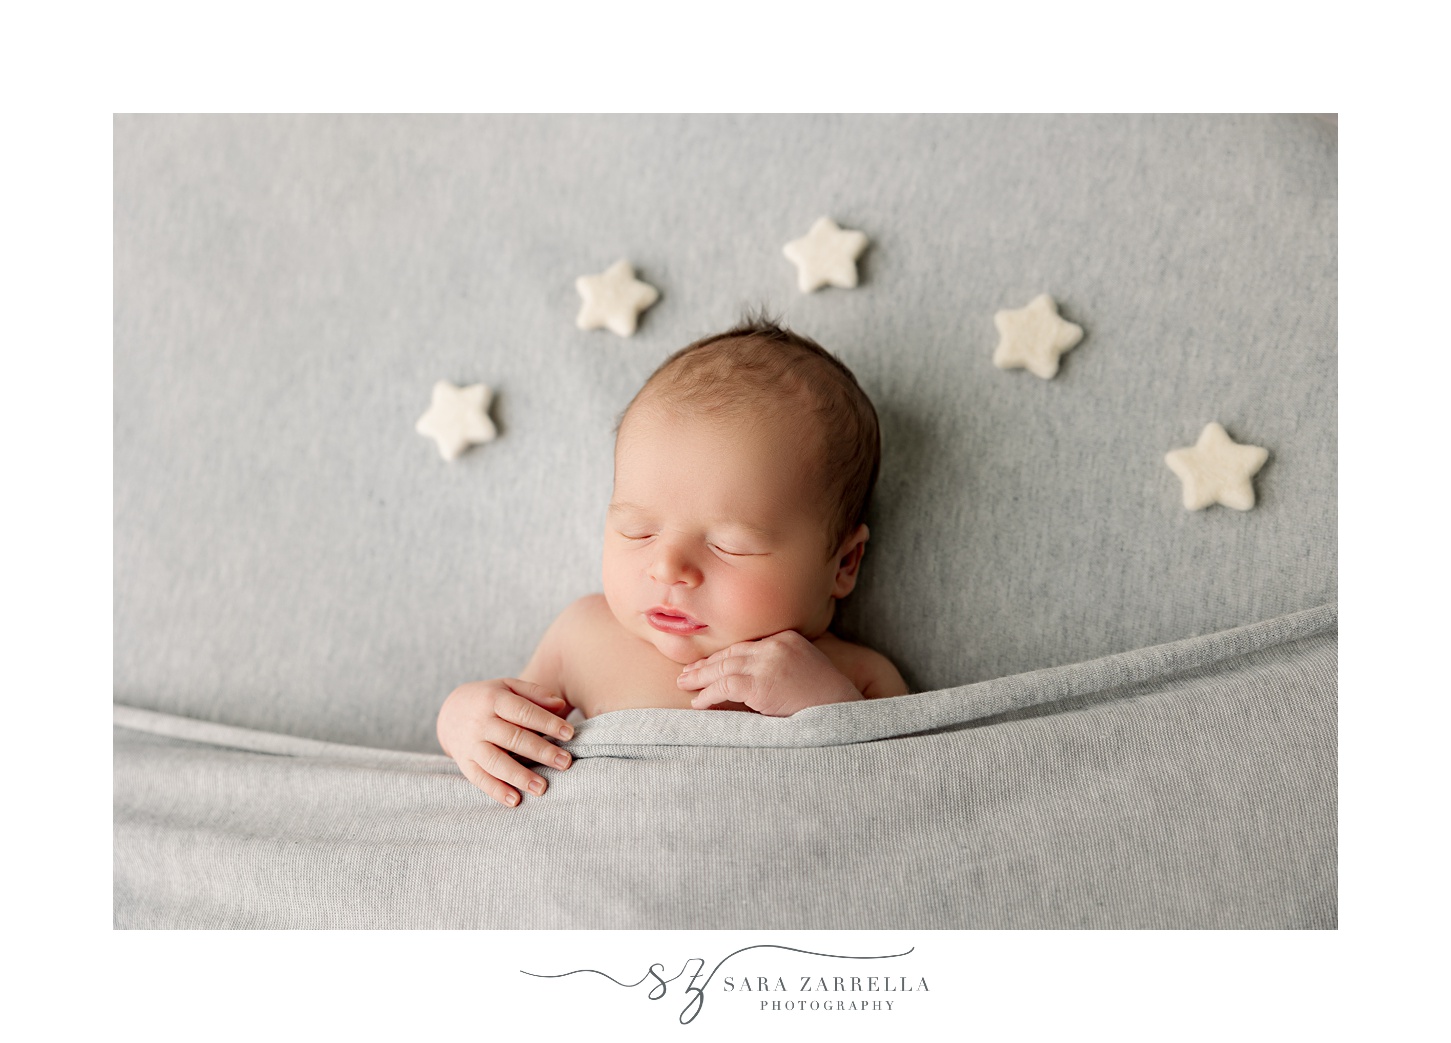 baby sleeps with stars over head during newborn session with Rhode Island newborn and family photographer Sara Zarrella Photography